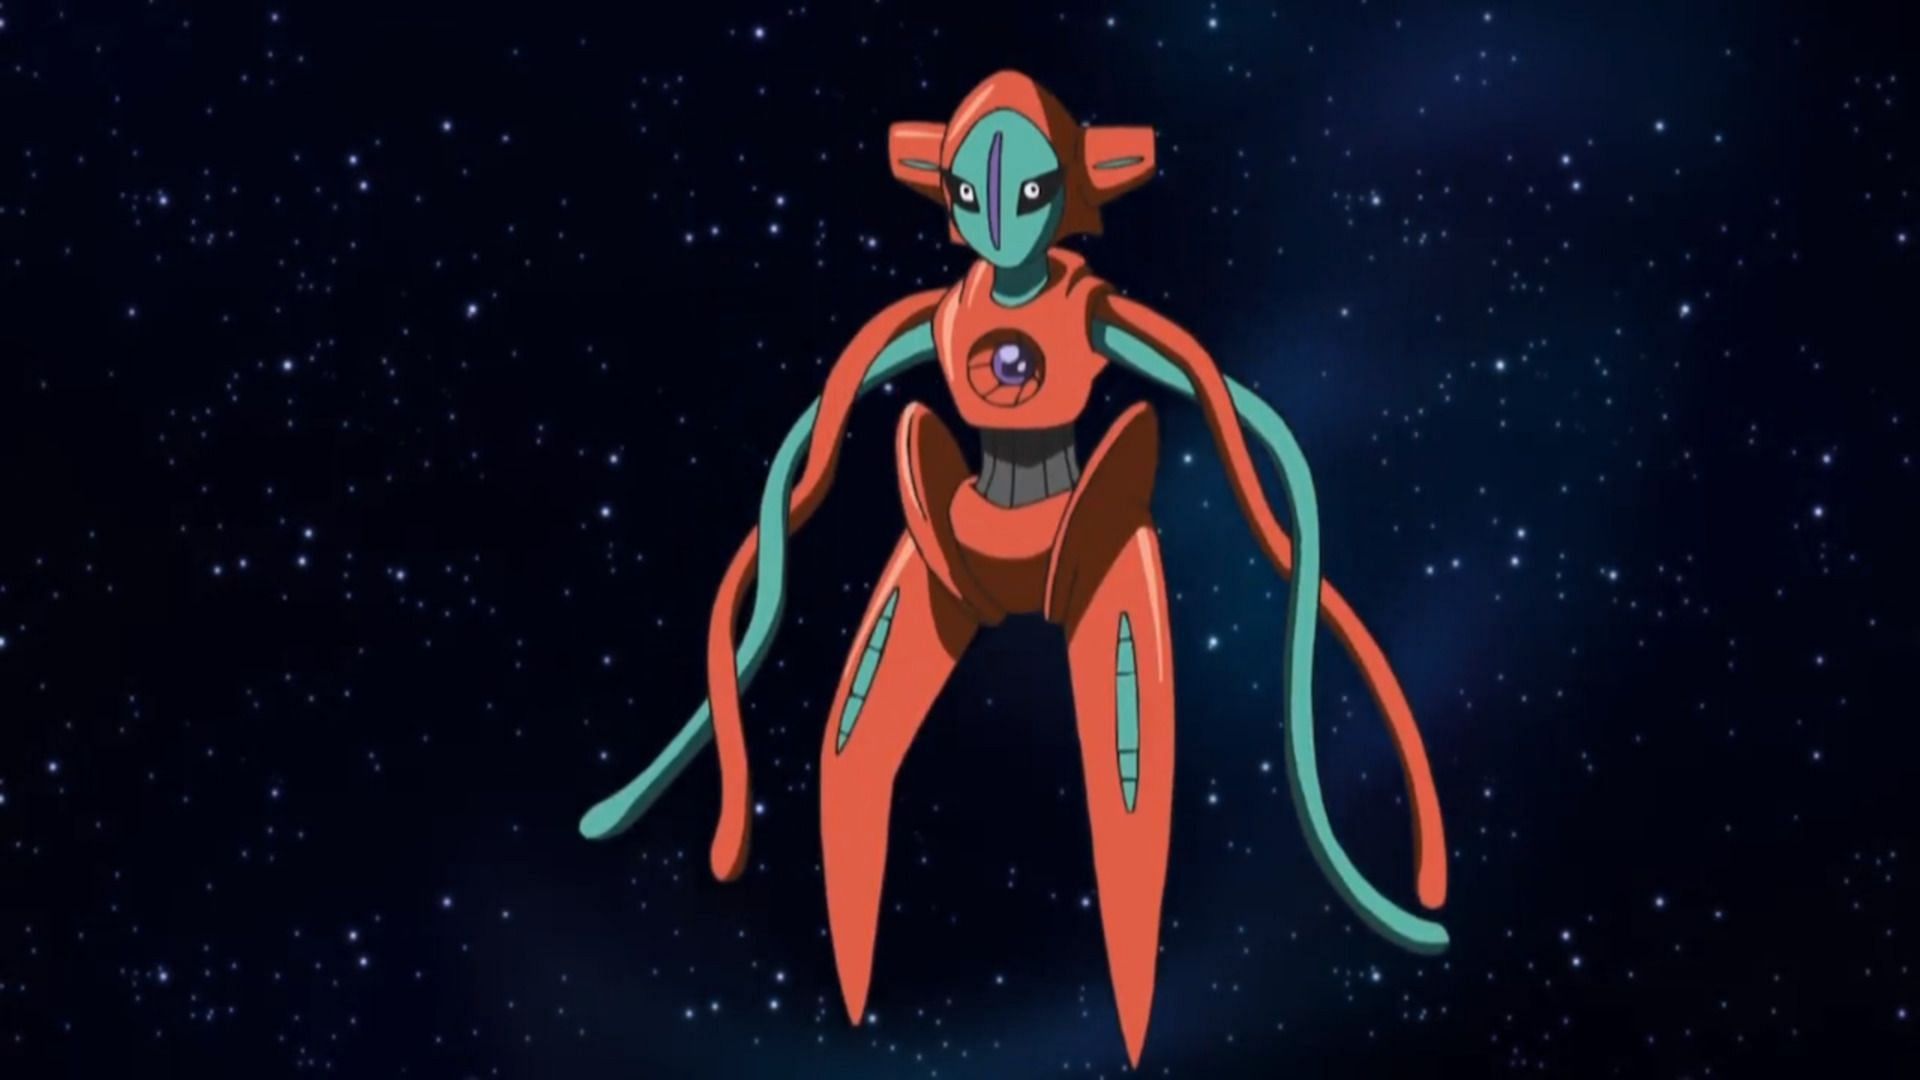 Deoxys as it appears in the anime (Image via The Pokemon Company)